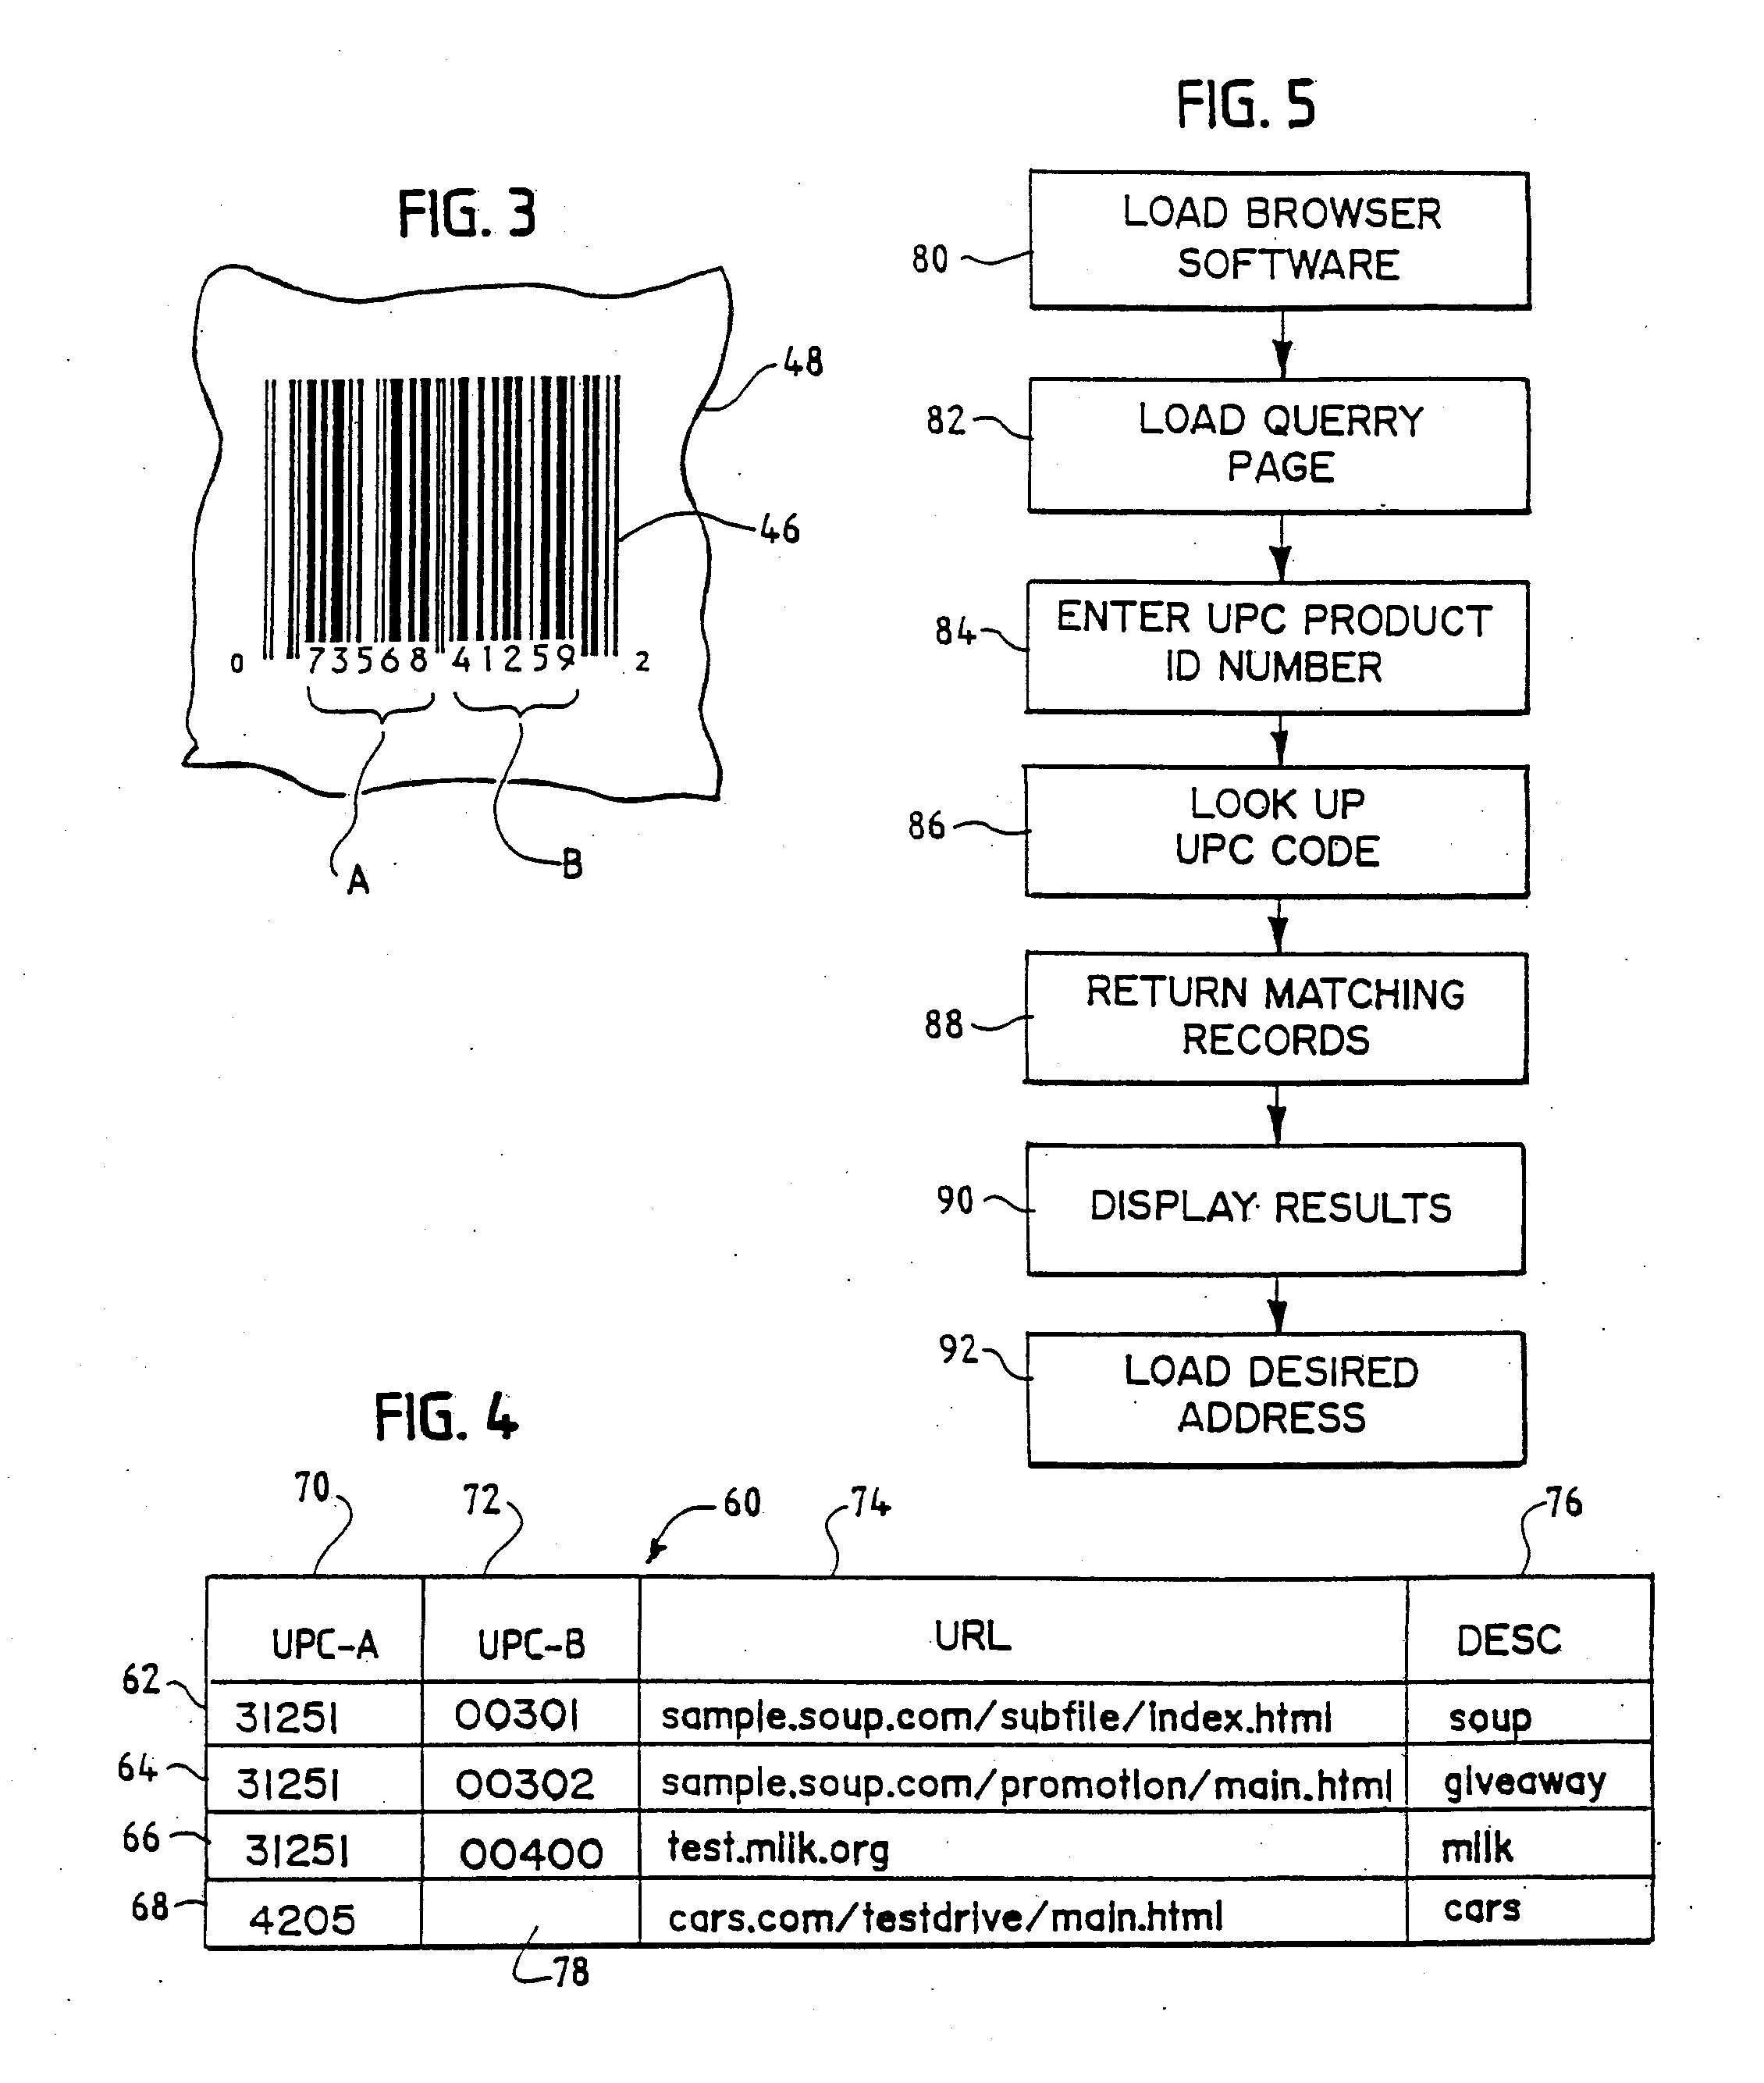 System and method for automatic access of a remote computer over a network